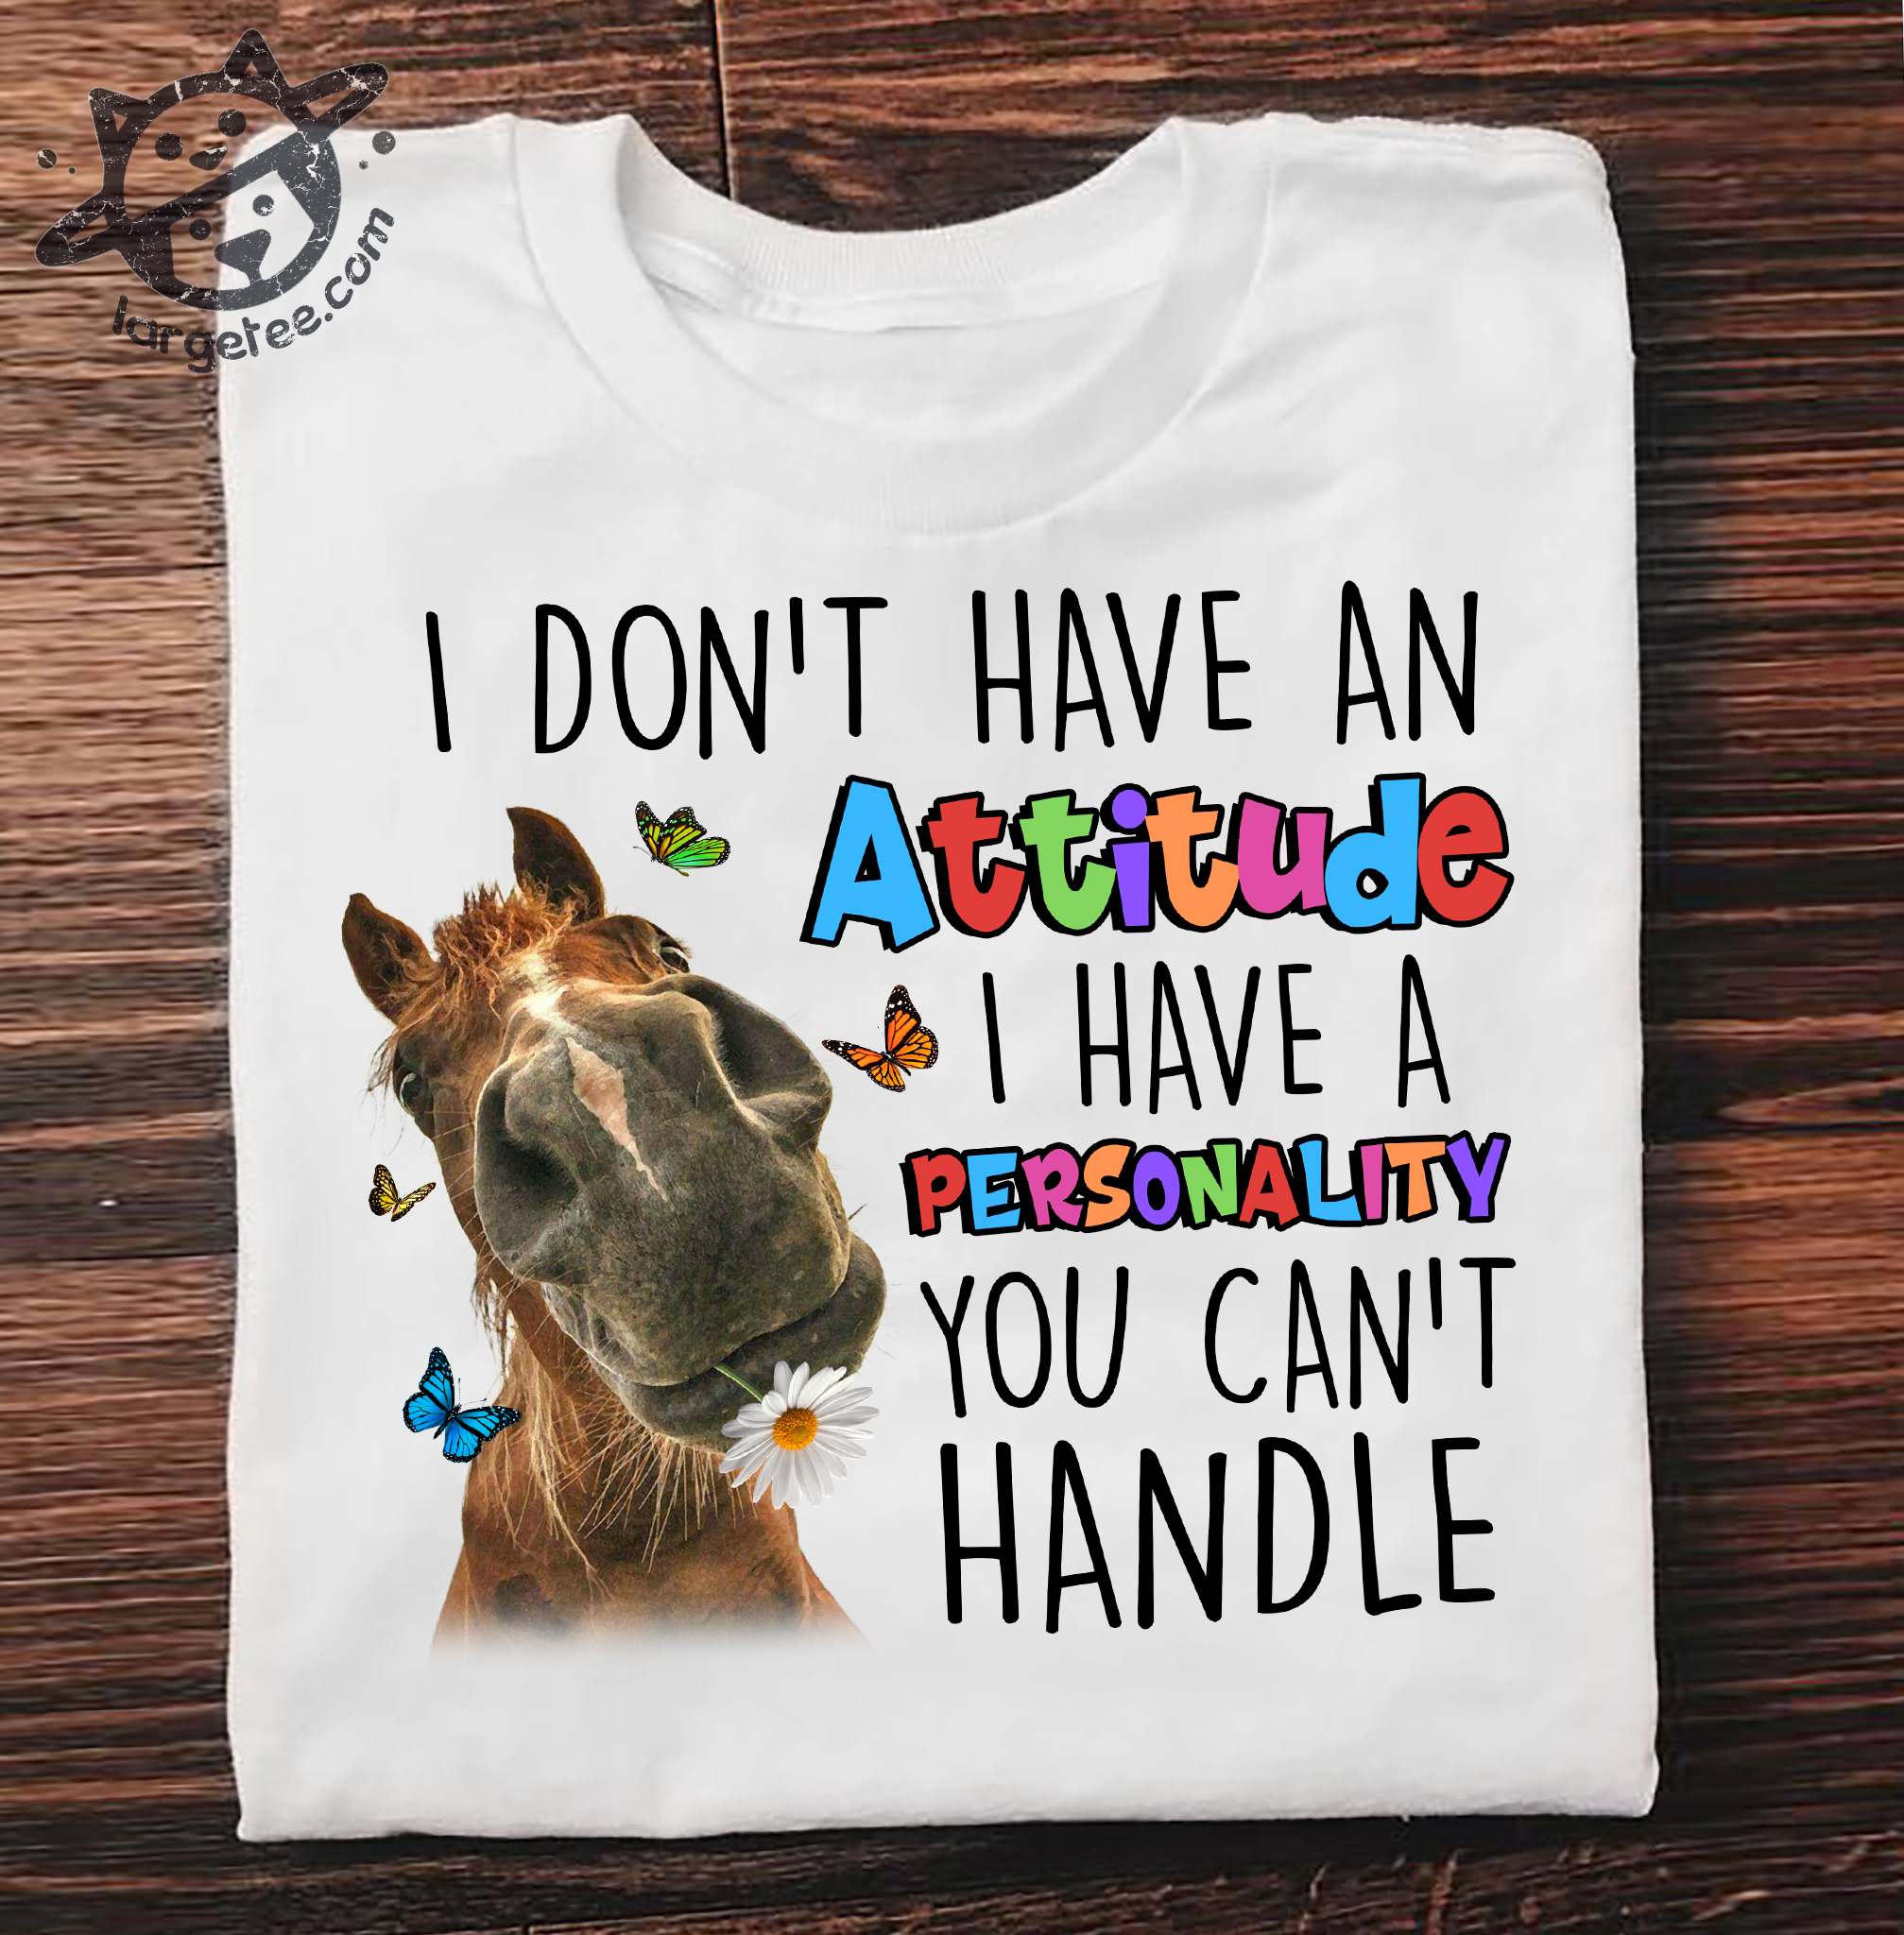 I don't have an attitude I have a personality you can't handle - Grumpy horse